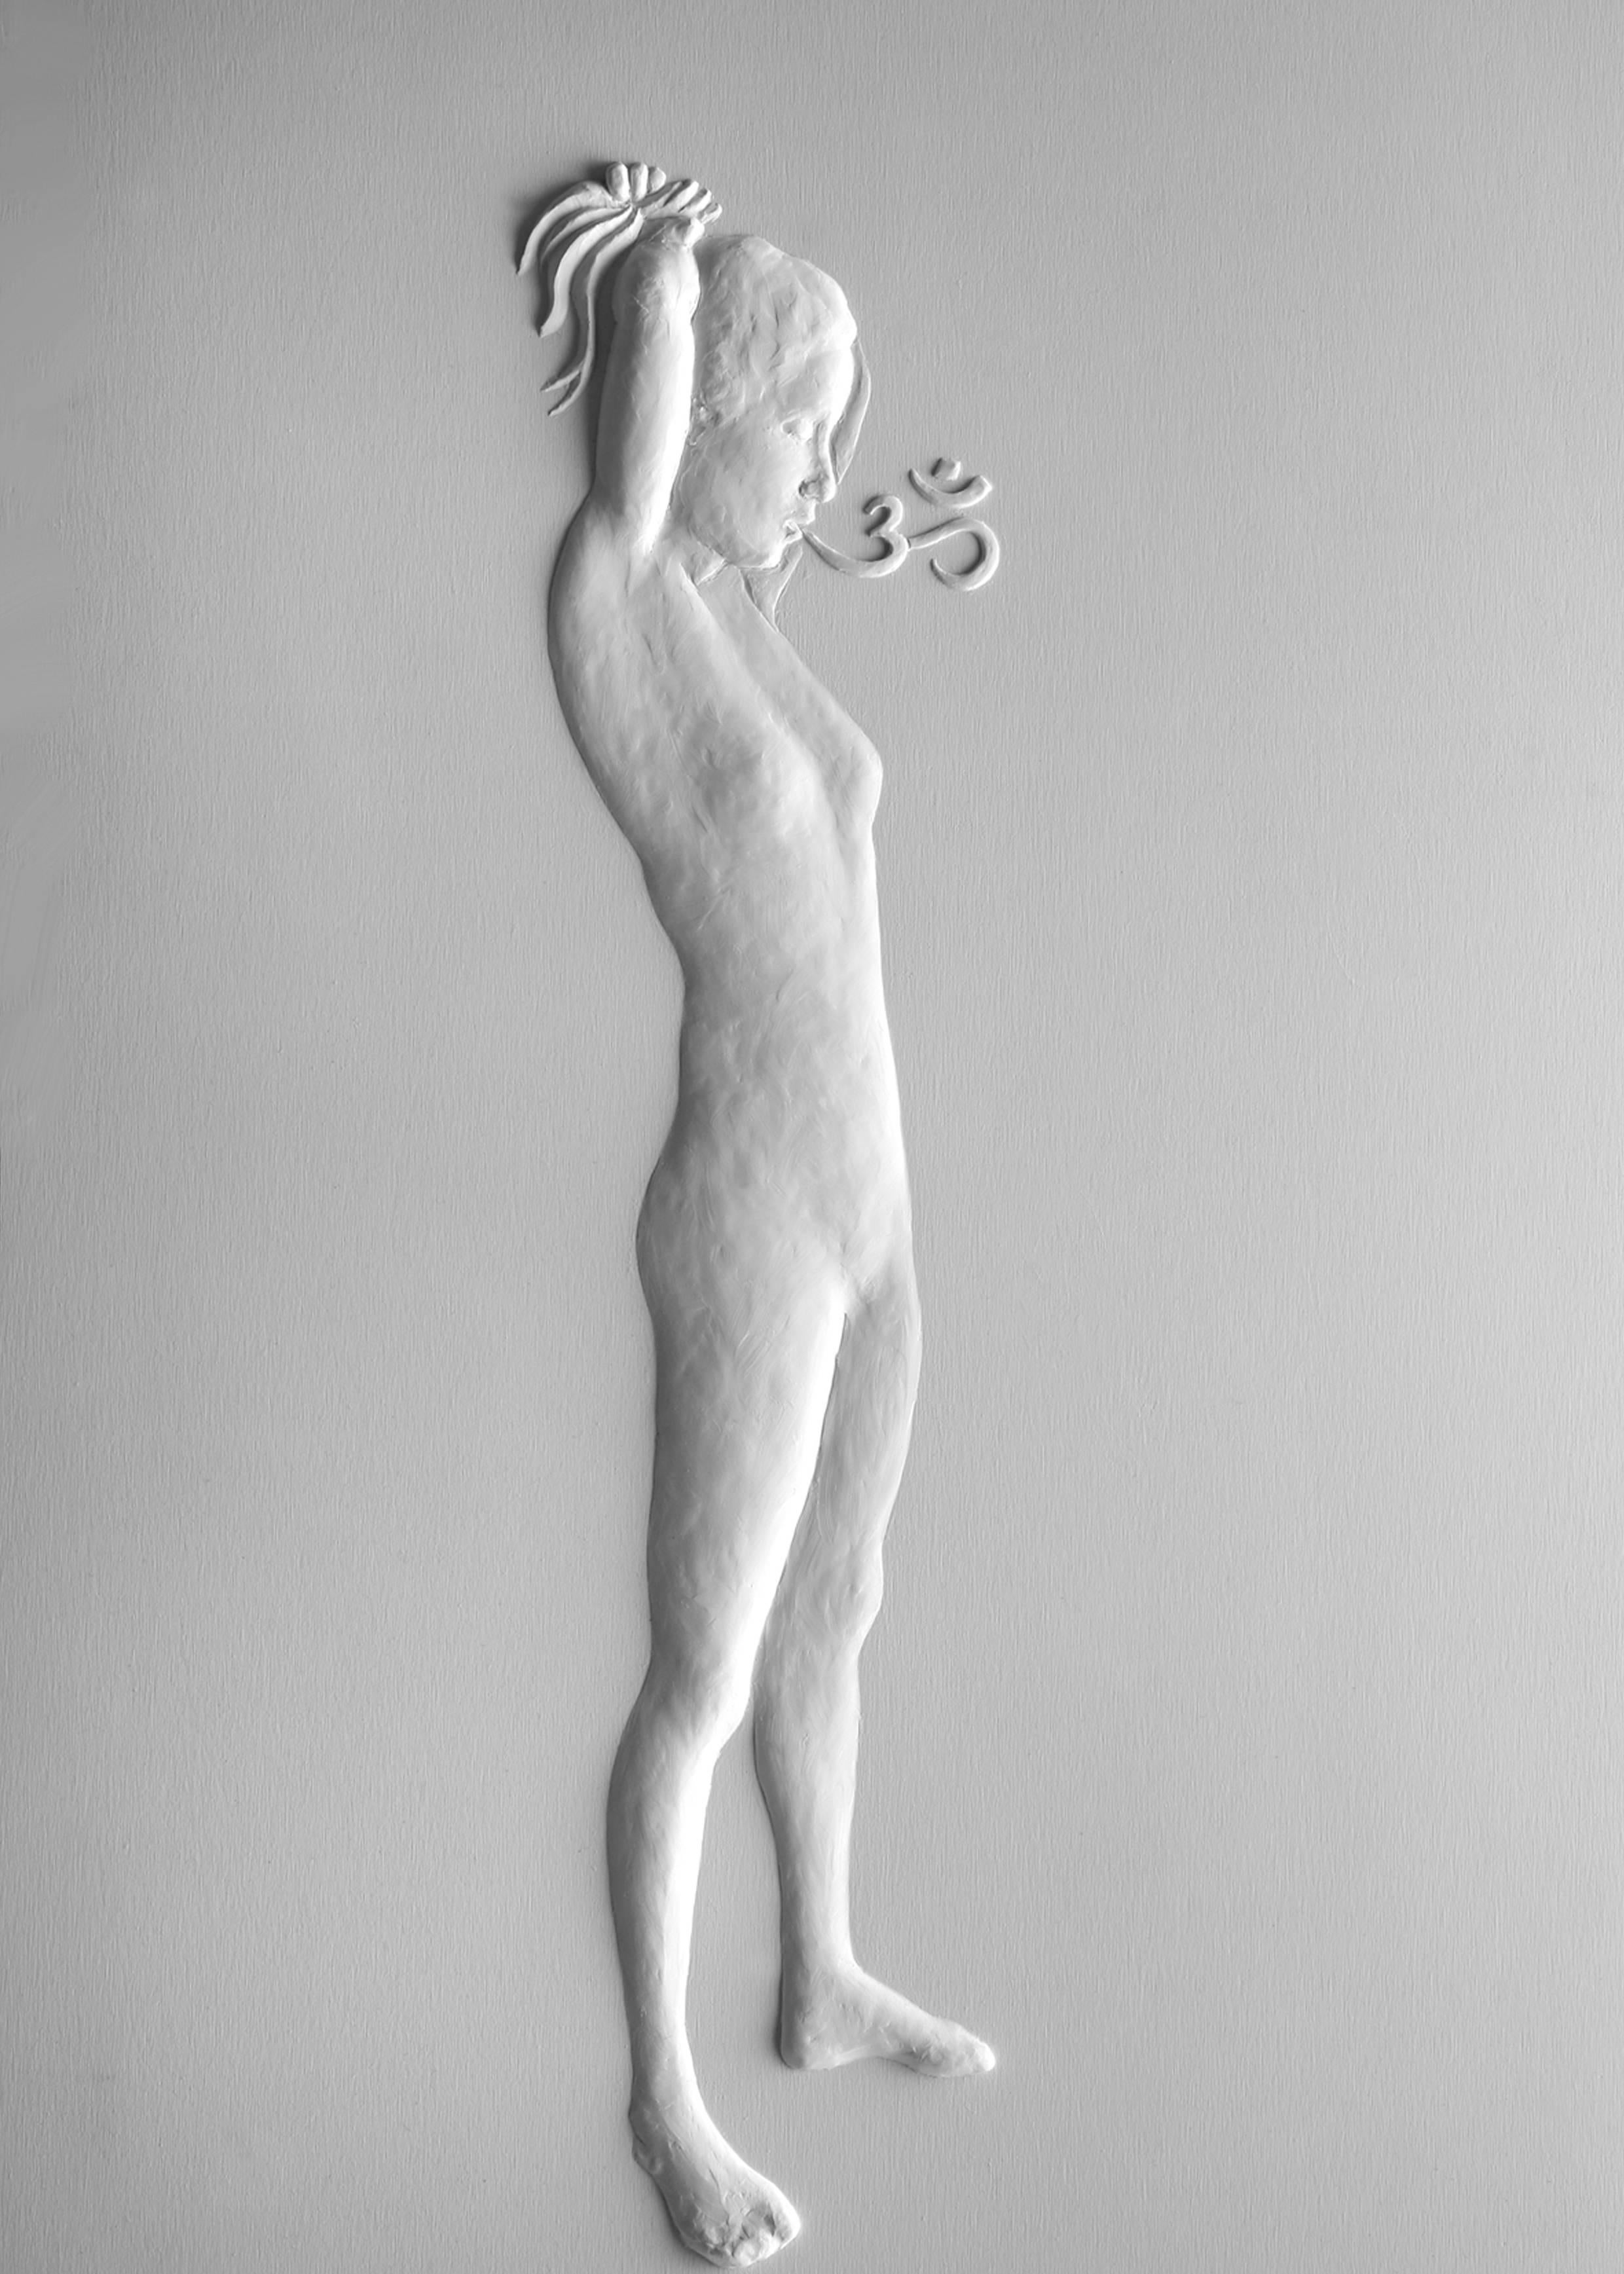 Maja Thommen Figurative Sculpture - "Om" Bas Relief Panel from the "Dressing" Series, 2011